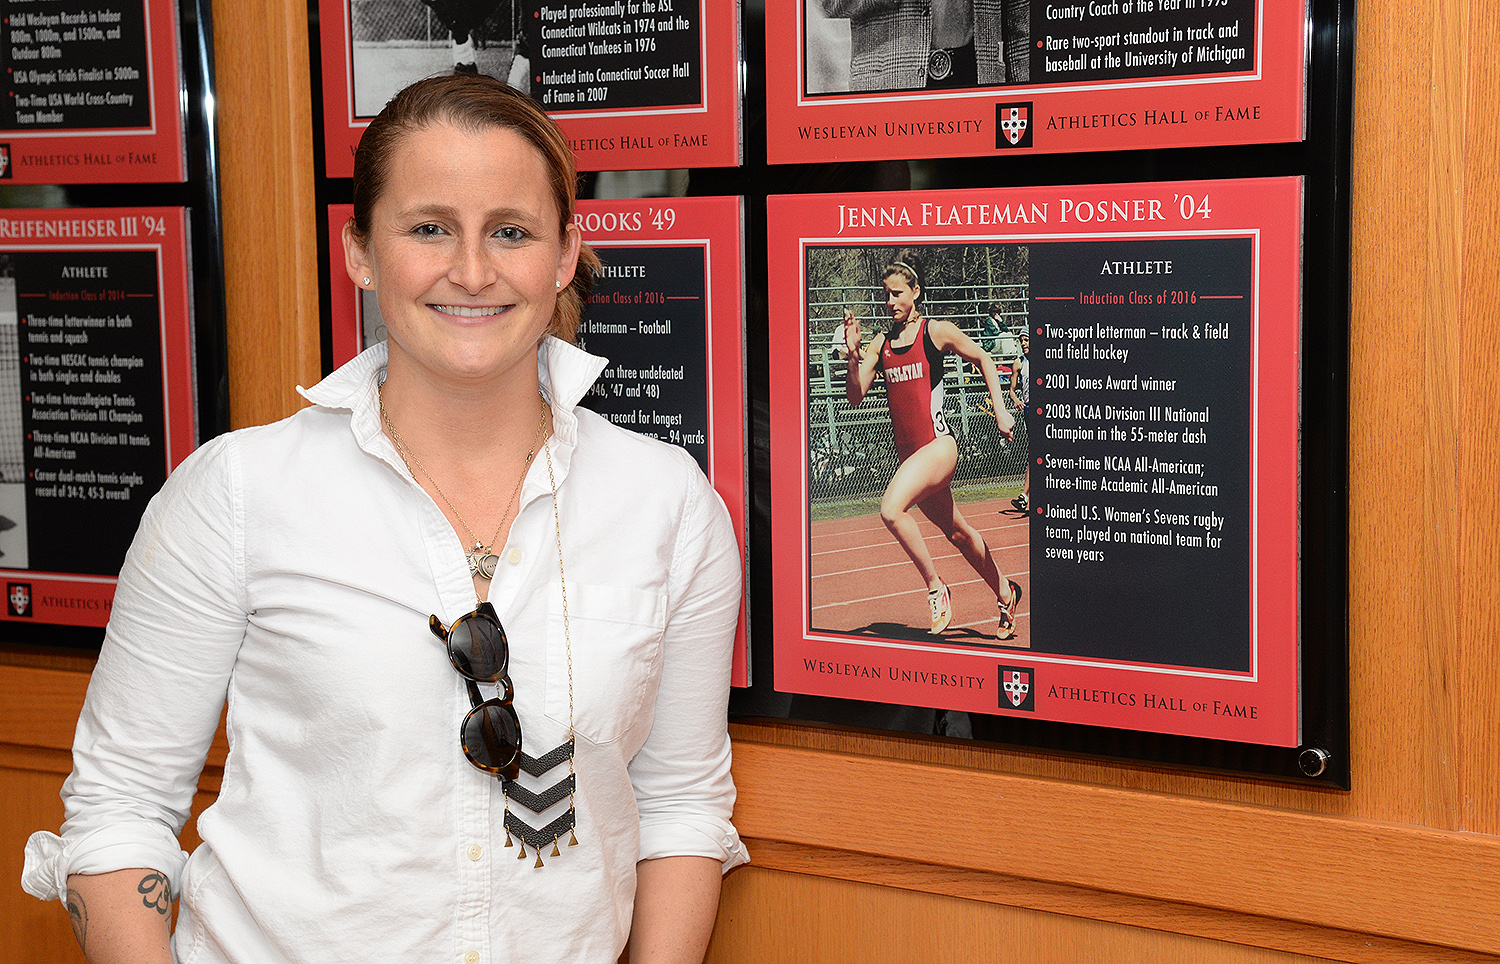 Jenna Flateman Posner '04, a 2003 NCAA National Champion, was an exceptional track athlete at Wesleyan, and also competed in field hockey for three years with the Cardinals before excelling in rugby following graduation. During her tenure at Wes, she set numerous records in track that still hold strong today. She is the indoor record holder in the 55-meter dash (:07.03) and the 200m (:25.71), and also a member of the 4x200m relay (1:44.74) and sprint medley relay (4:30.65) teams. Flateman Posner holds the fastest outdoor times in the 100m (:11.90) and the 200m (:24.88) as well, while also holding the record in the sprint medley relay (4:21.78). She piled up numerous accolades throughout her career, most notably the 2003 NCAA national title in the 55-meter dash, while also winning numerous New England Division III, NESCAC and ECAC titles, and earning several NCAA All-American, All-New England Division III, All-NESCAC and All-ECAC honors. Following her storied career, Flateman Posner competed in women's rugby and became a star on the USA Women's Sevens team.